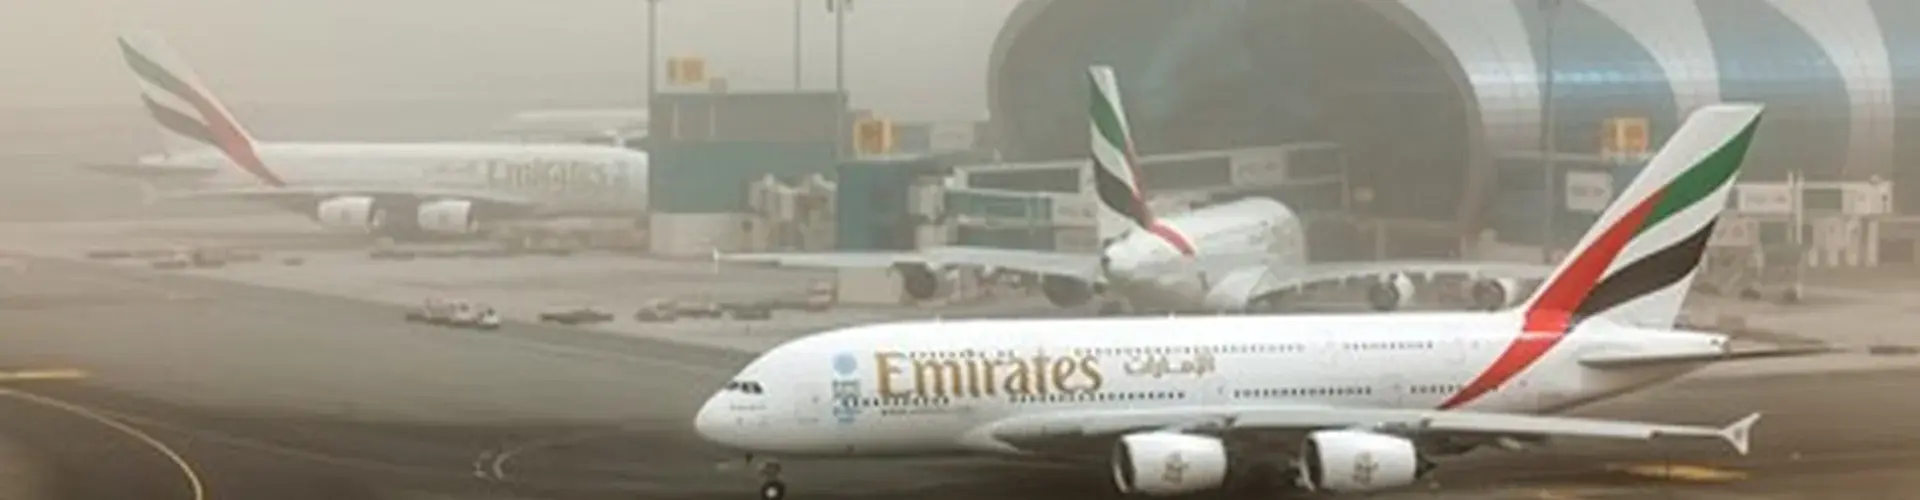 Airplane taxiing during a dust storm at Dubai International Airport.jpg